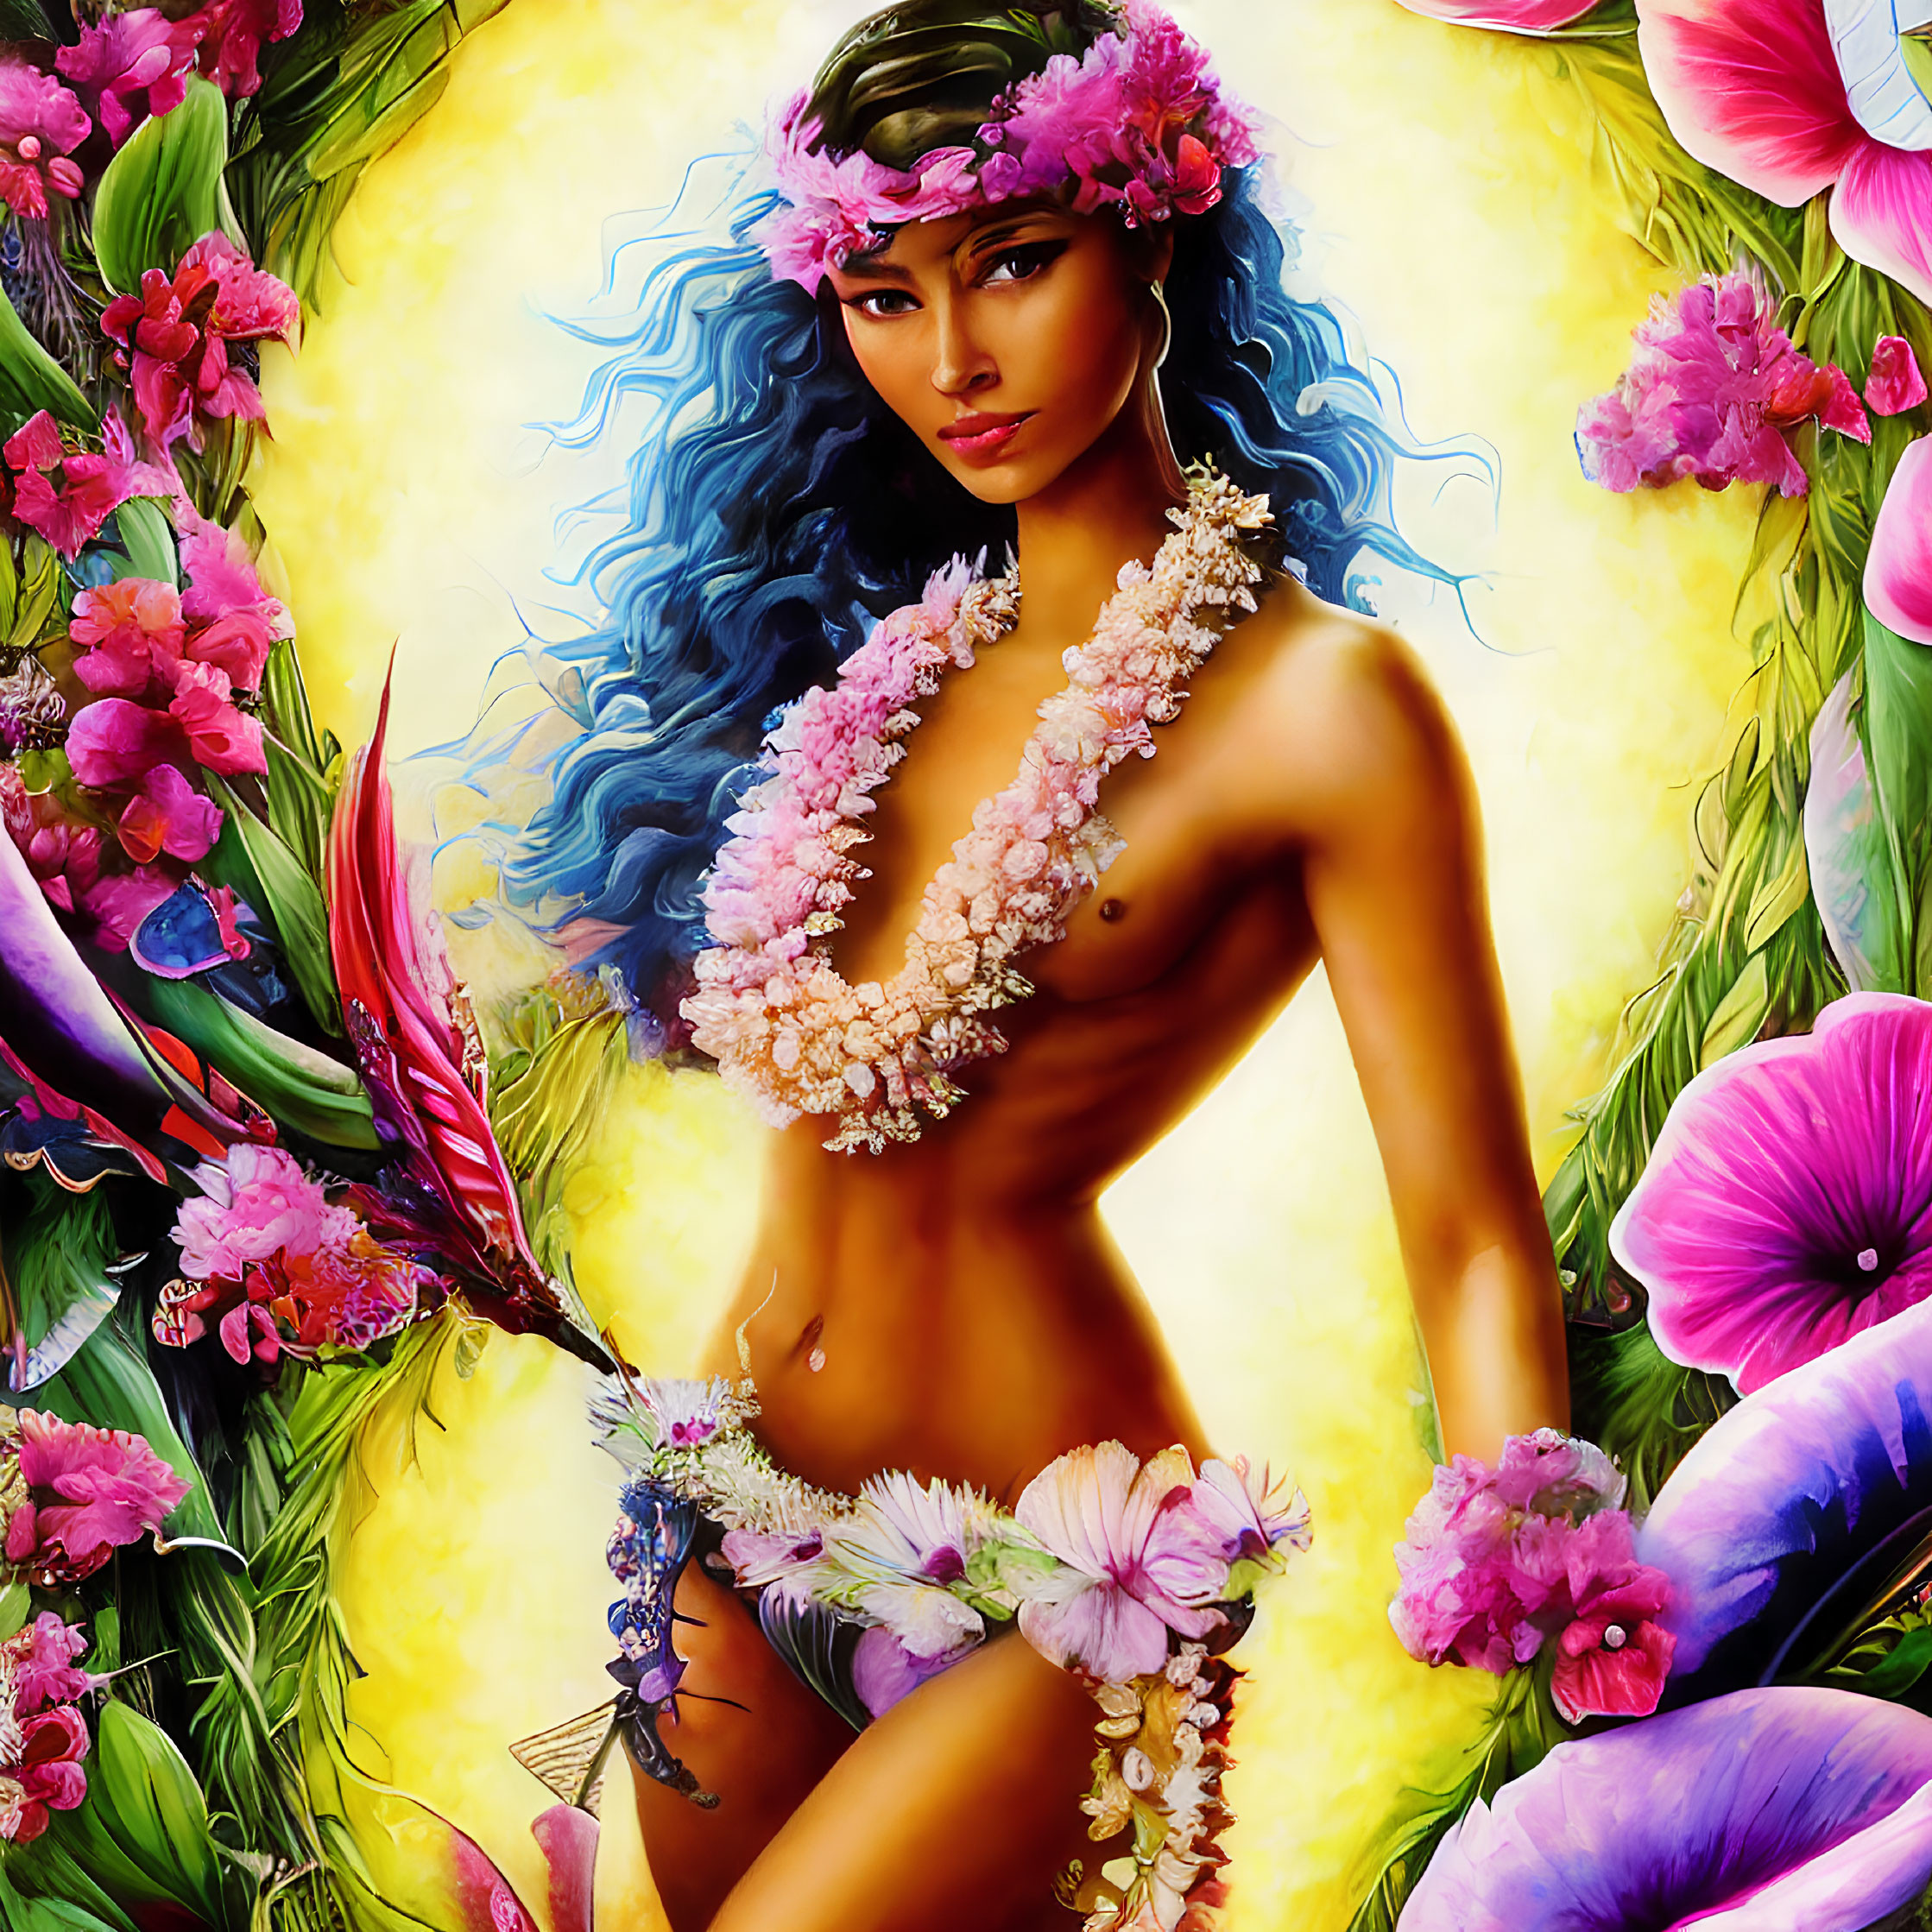 Stylized portrait of woman with floral lei in lush flower setting